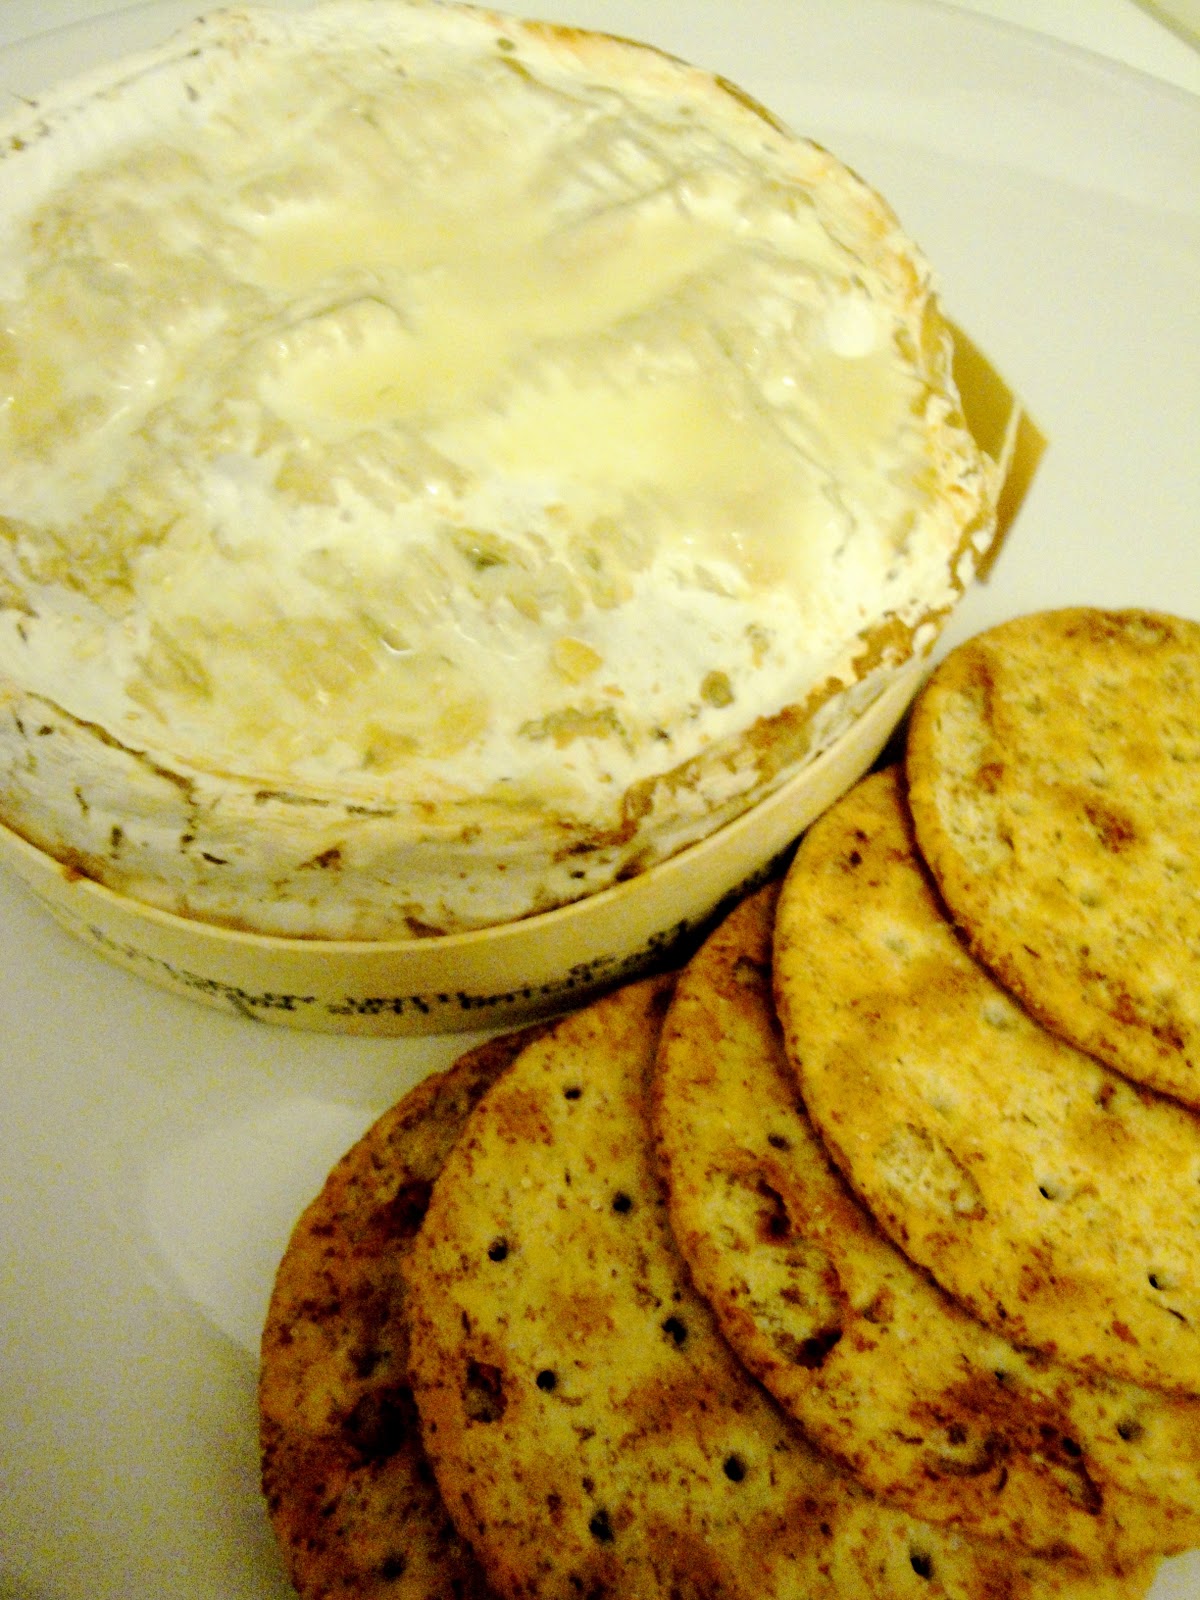 Culinary Conquests: Camembert Baked in the Box